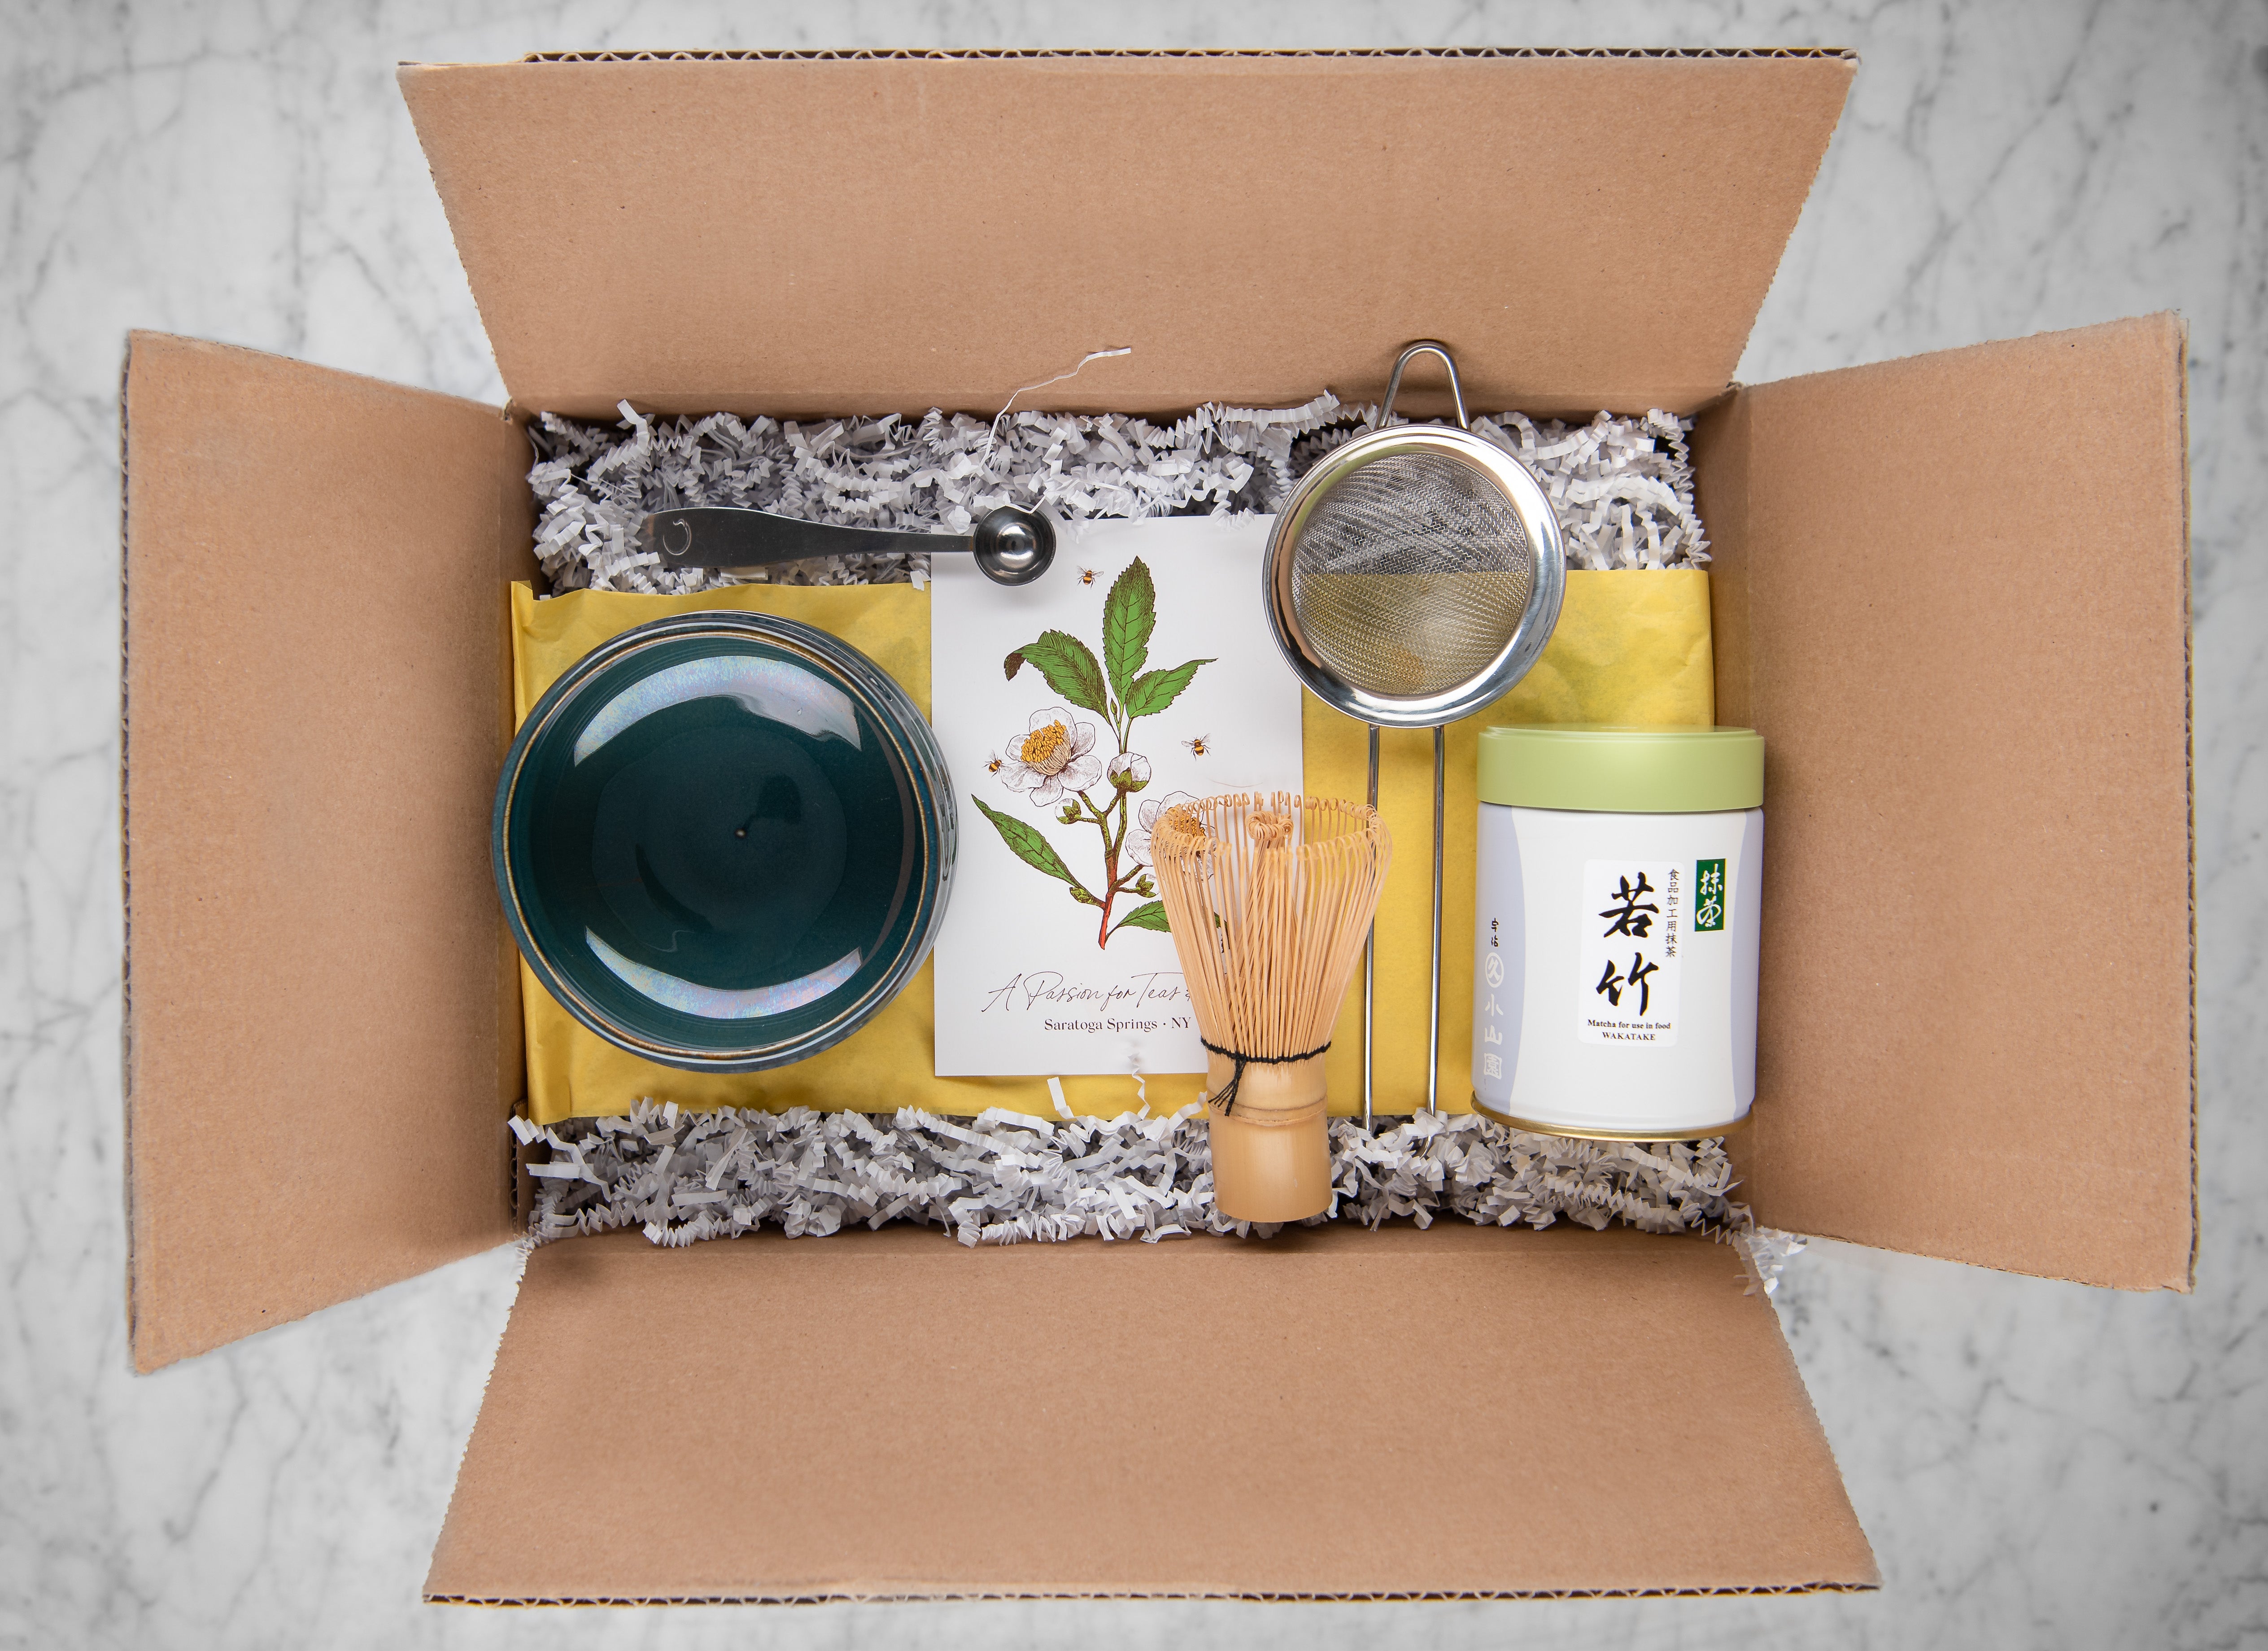 gift box with decorative fill featuring a jade matcha bowl, matcha whisk, tin of premium grade wakatake matcha, stainless steel sifter and perfect matcha spoon